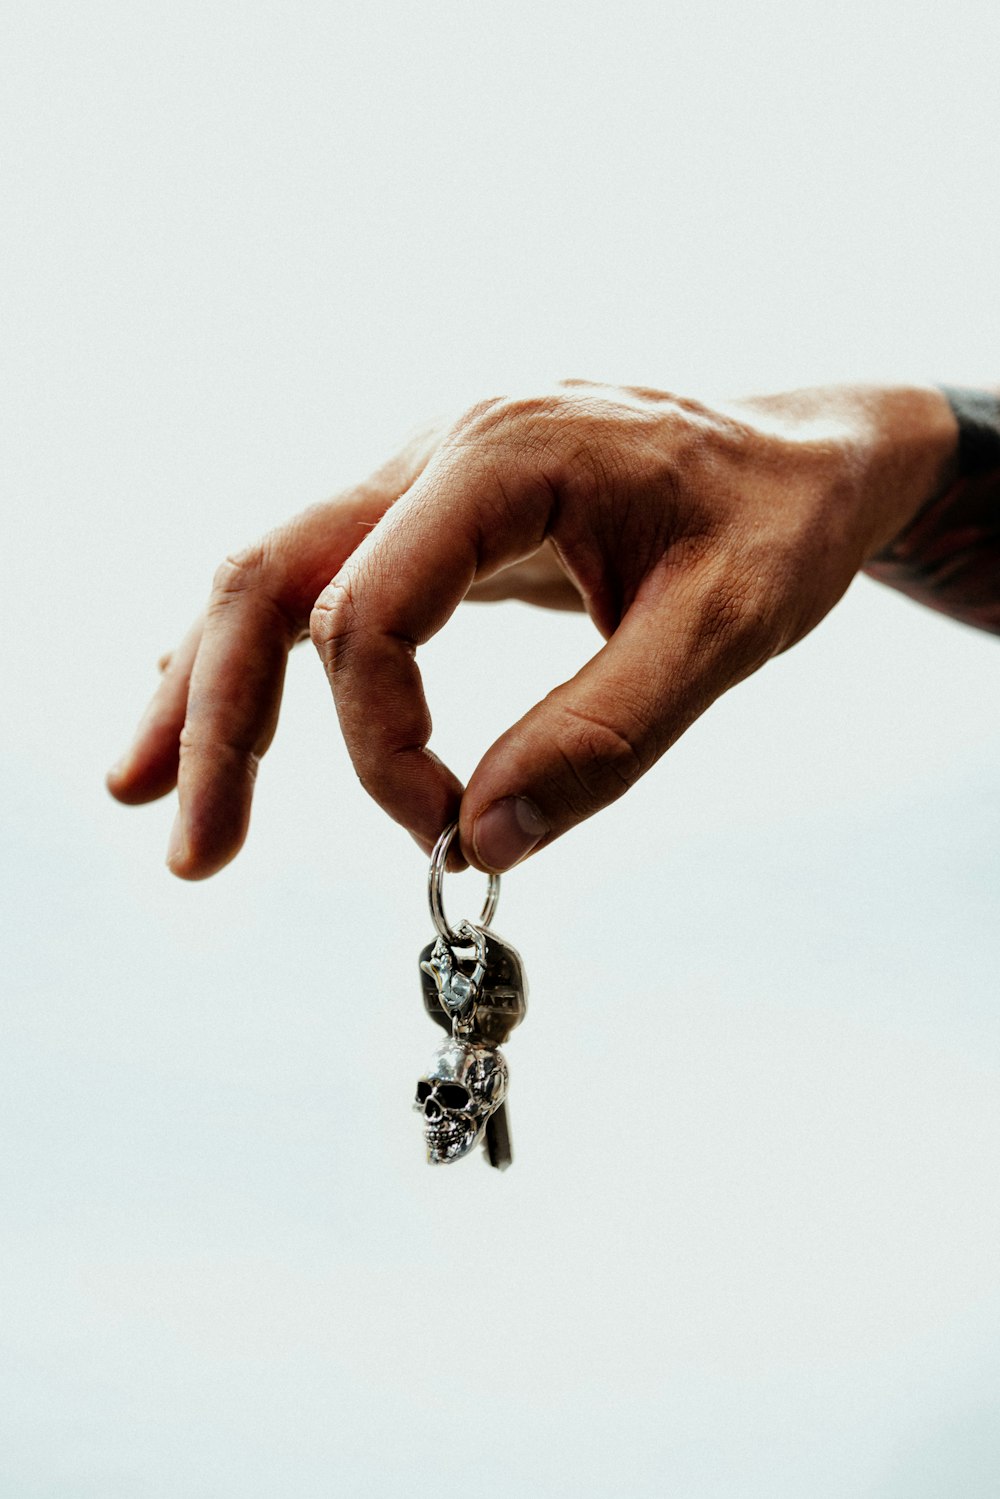 a person holding a small key in their hand